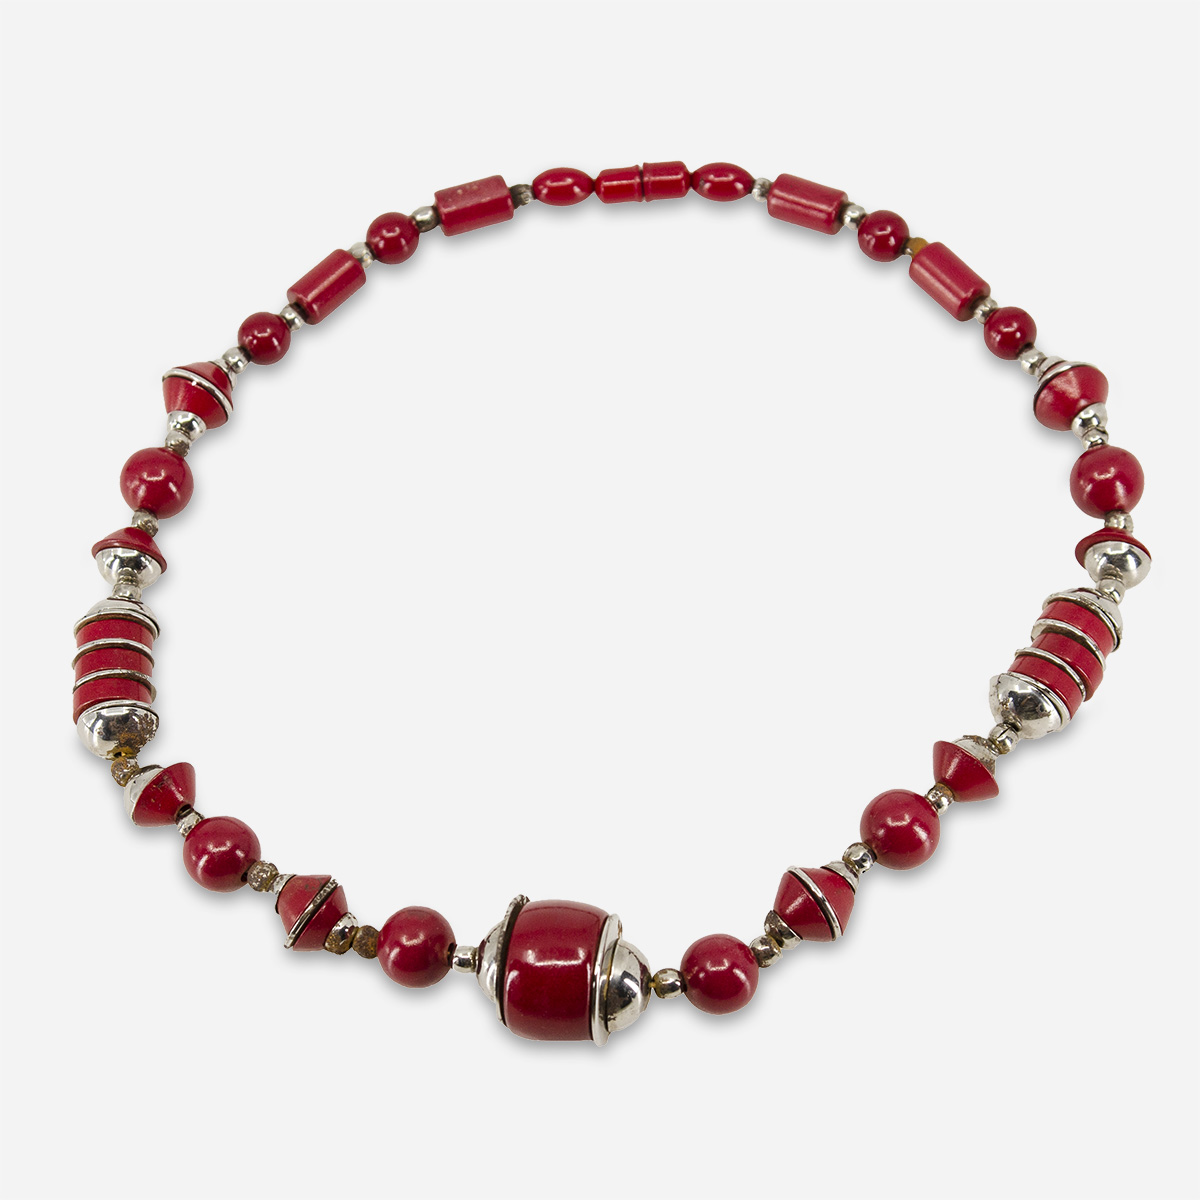 1930s chrome red beaded necklace